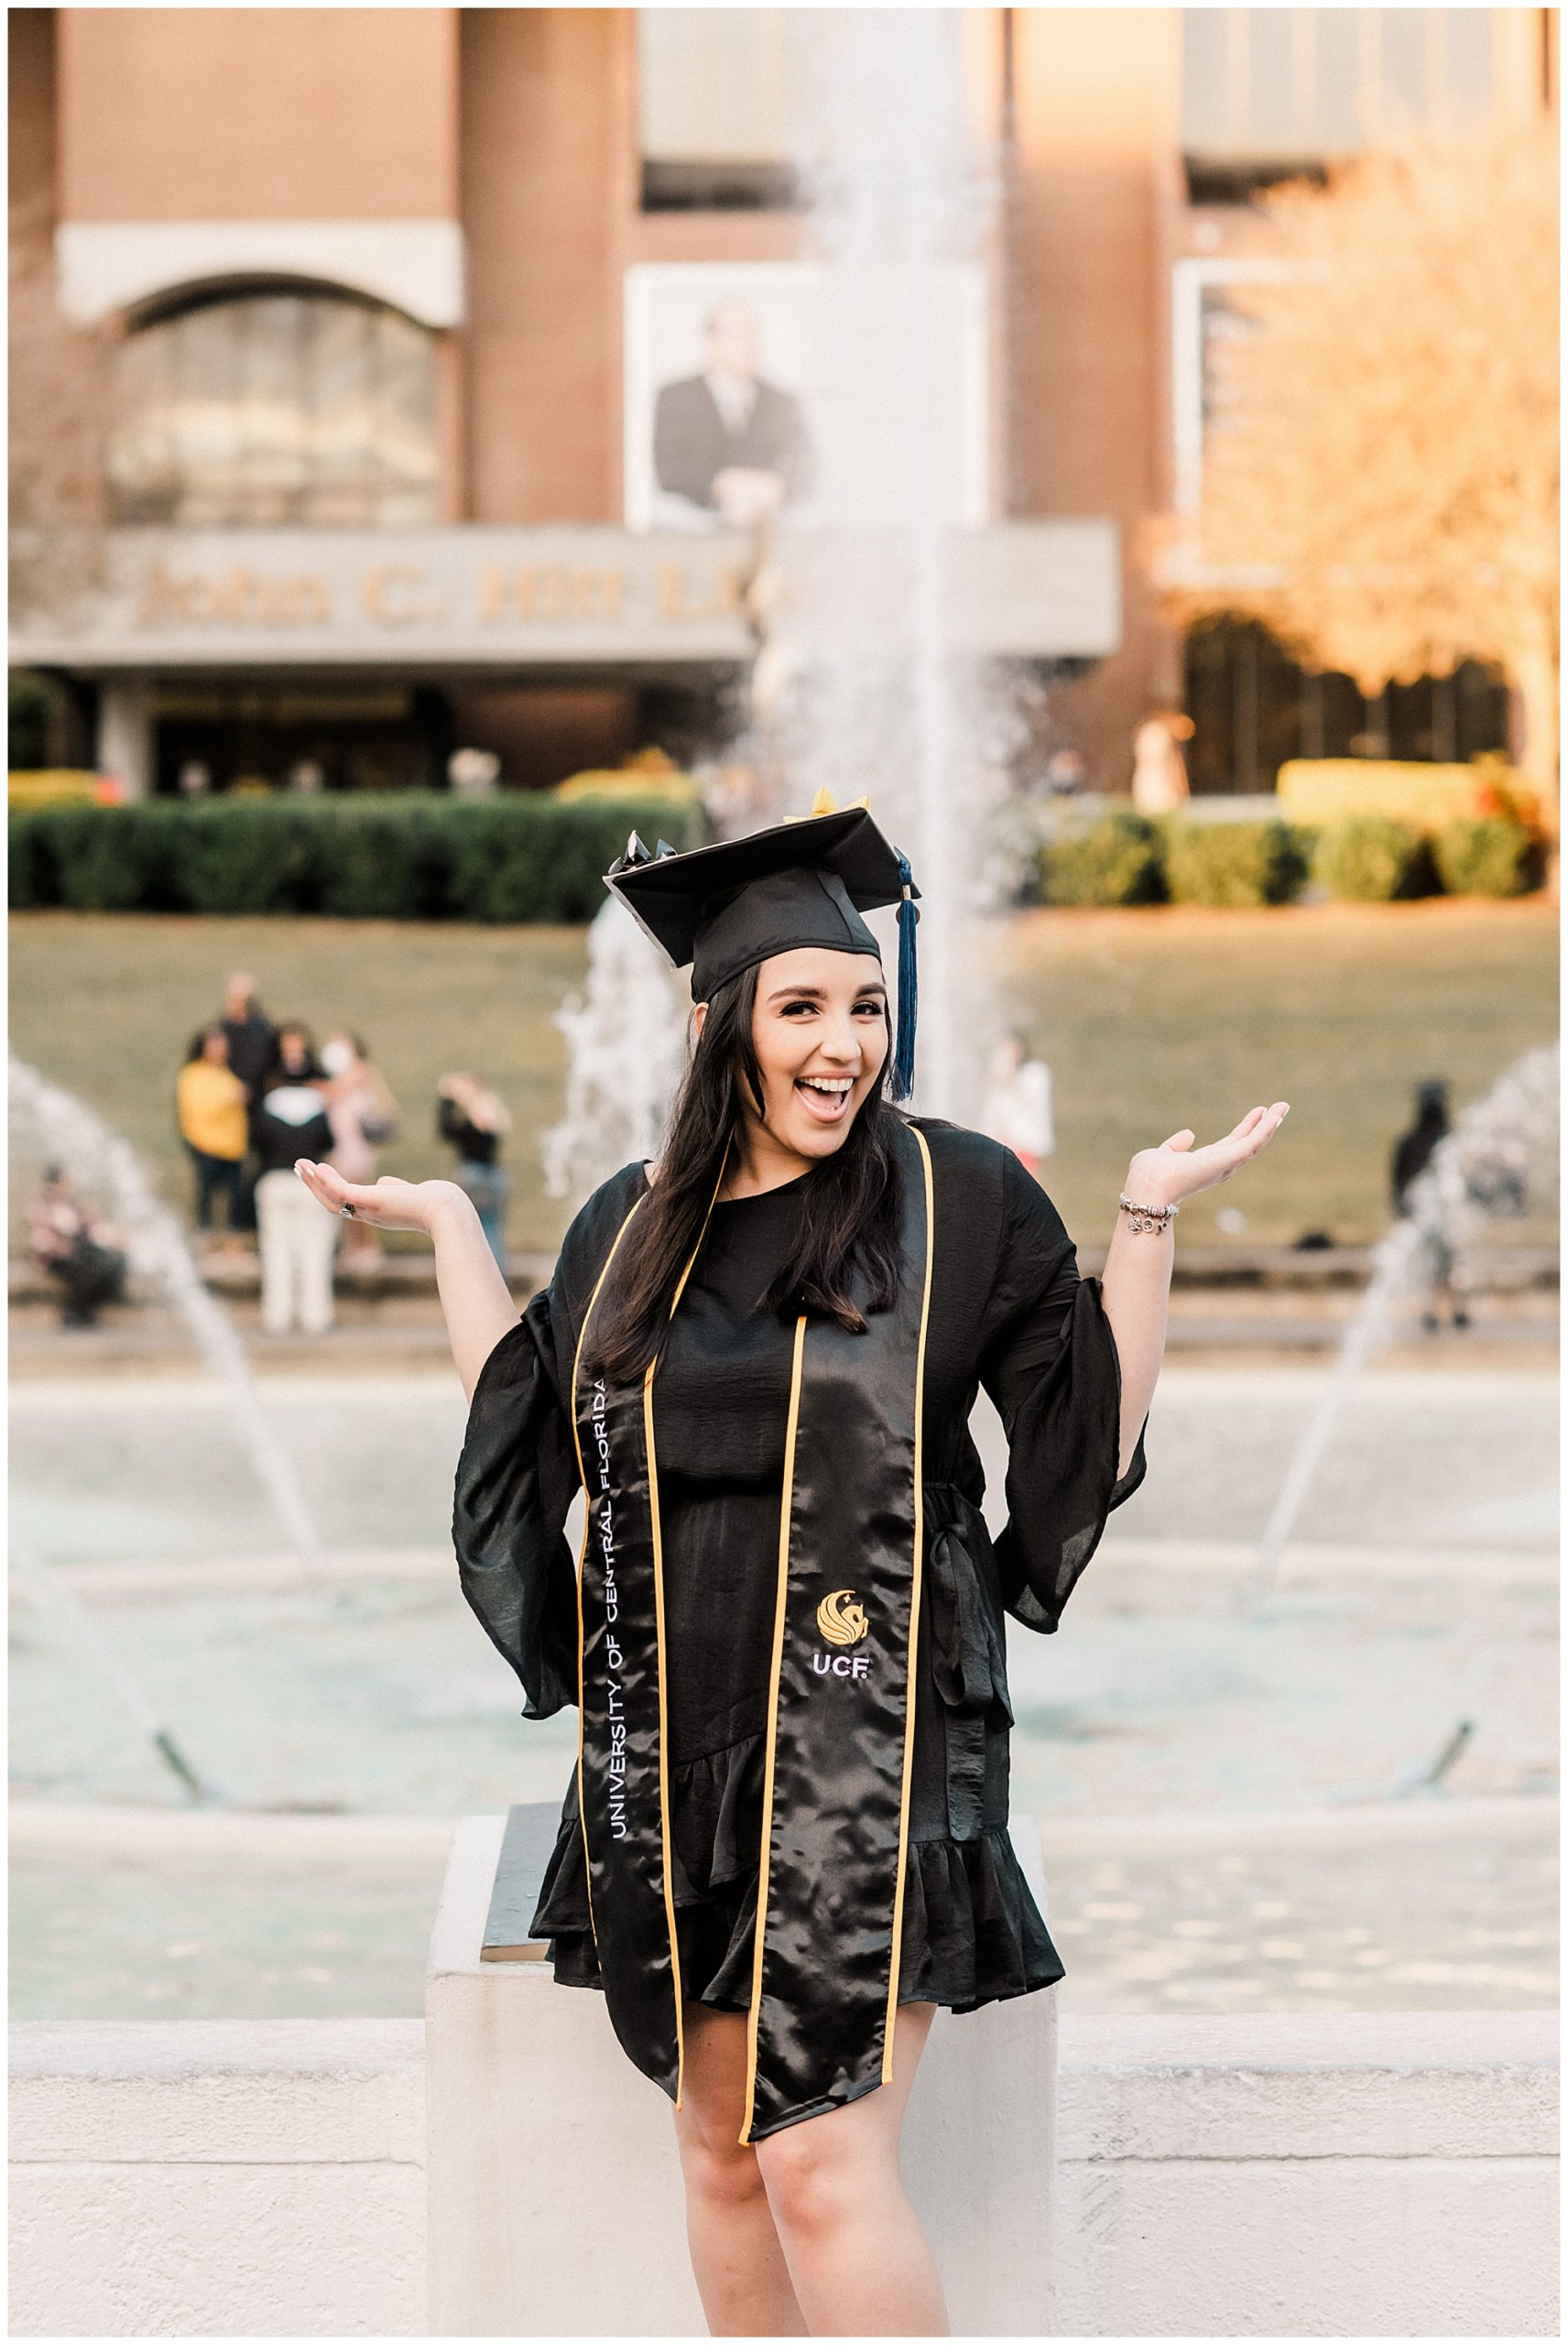 UCF Fall Graduation Session at the University of Central Florida | Haleigh Nicole Photography | UCF Graduation Photographer | This UCF fall graduation session featured shades of gold and black. The UCF graduate was an Elementary Education major and celebrated with champagne and confetti in the rain. #confettigraduate #champagnegraduate #ucfgraduation #ucf #classof2020 #ucfgraduationphotographer #orlandoportraitphotographer